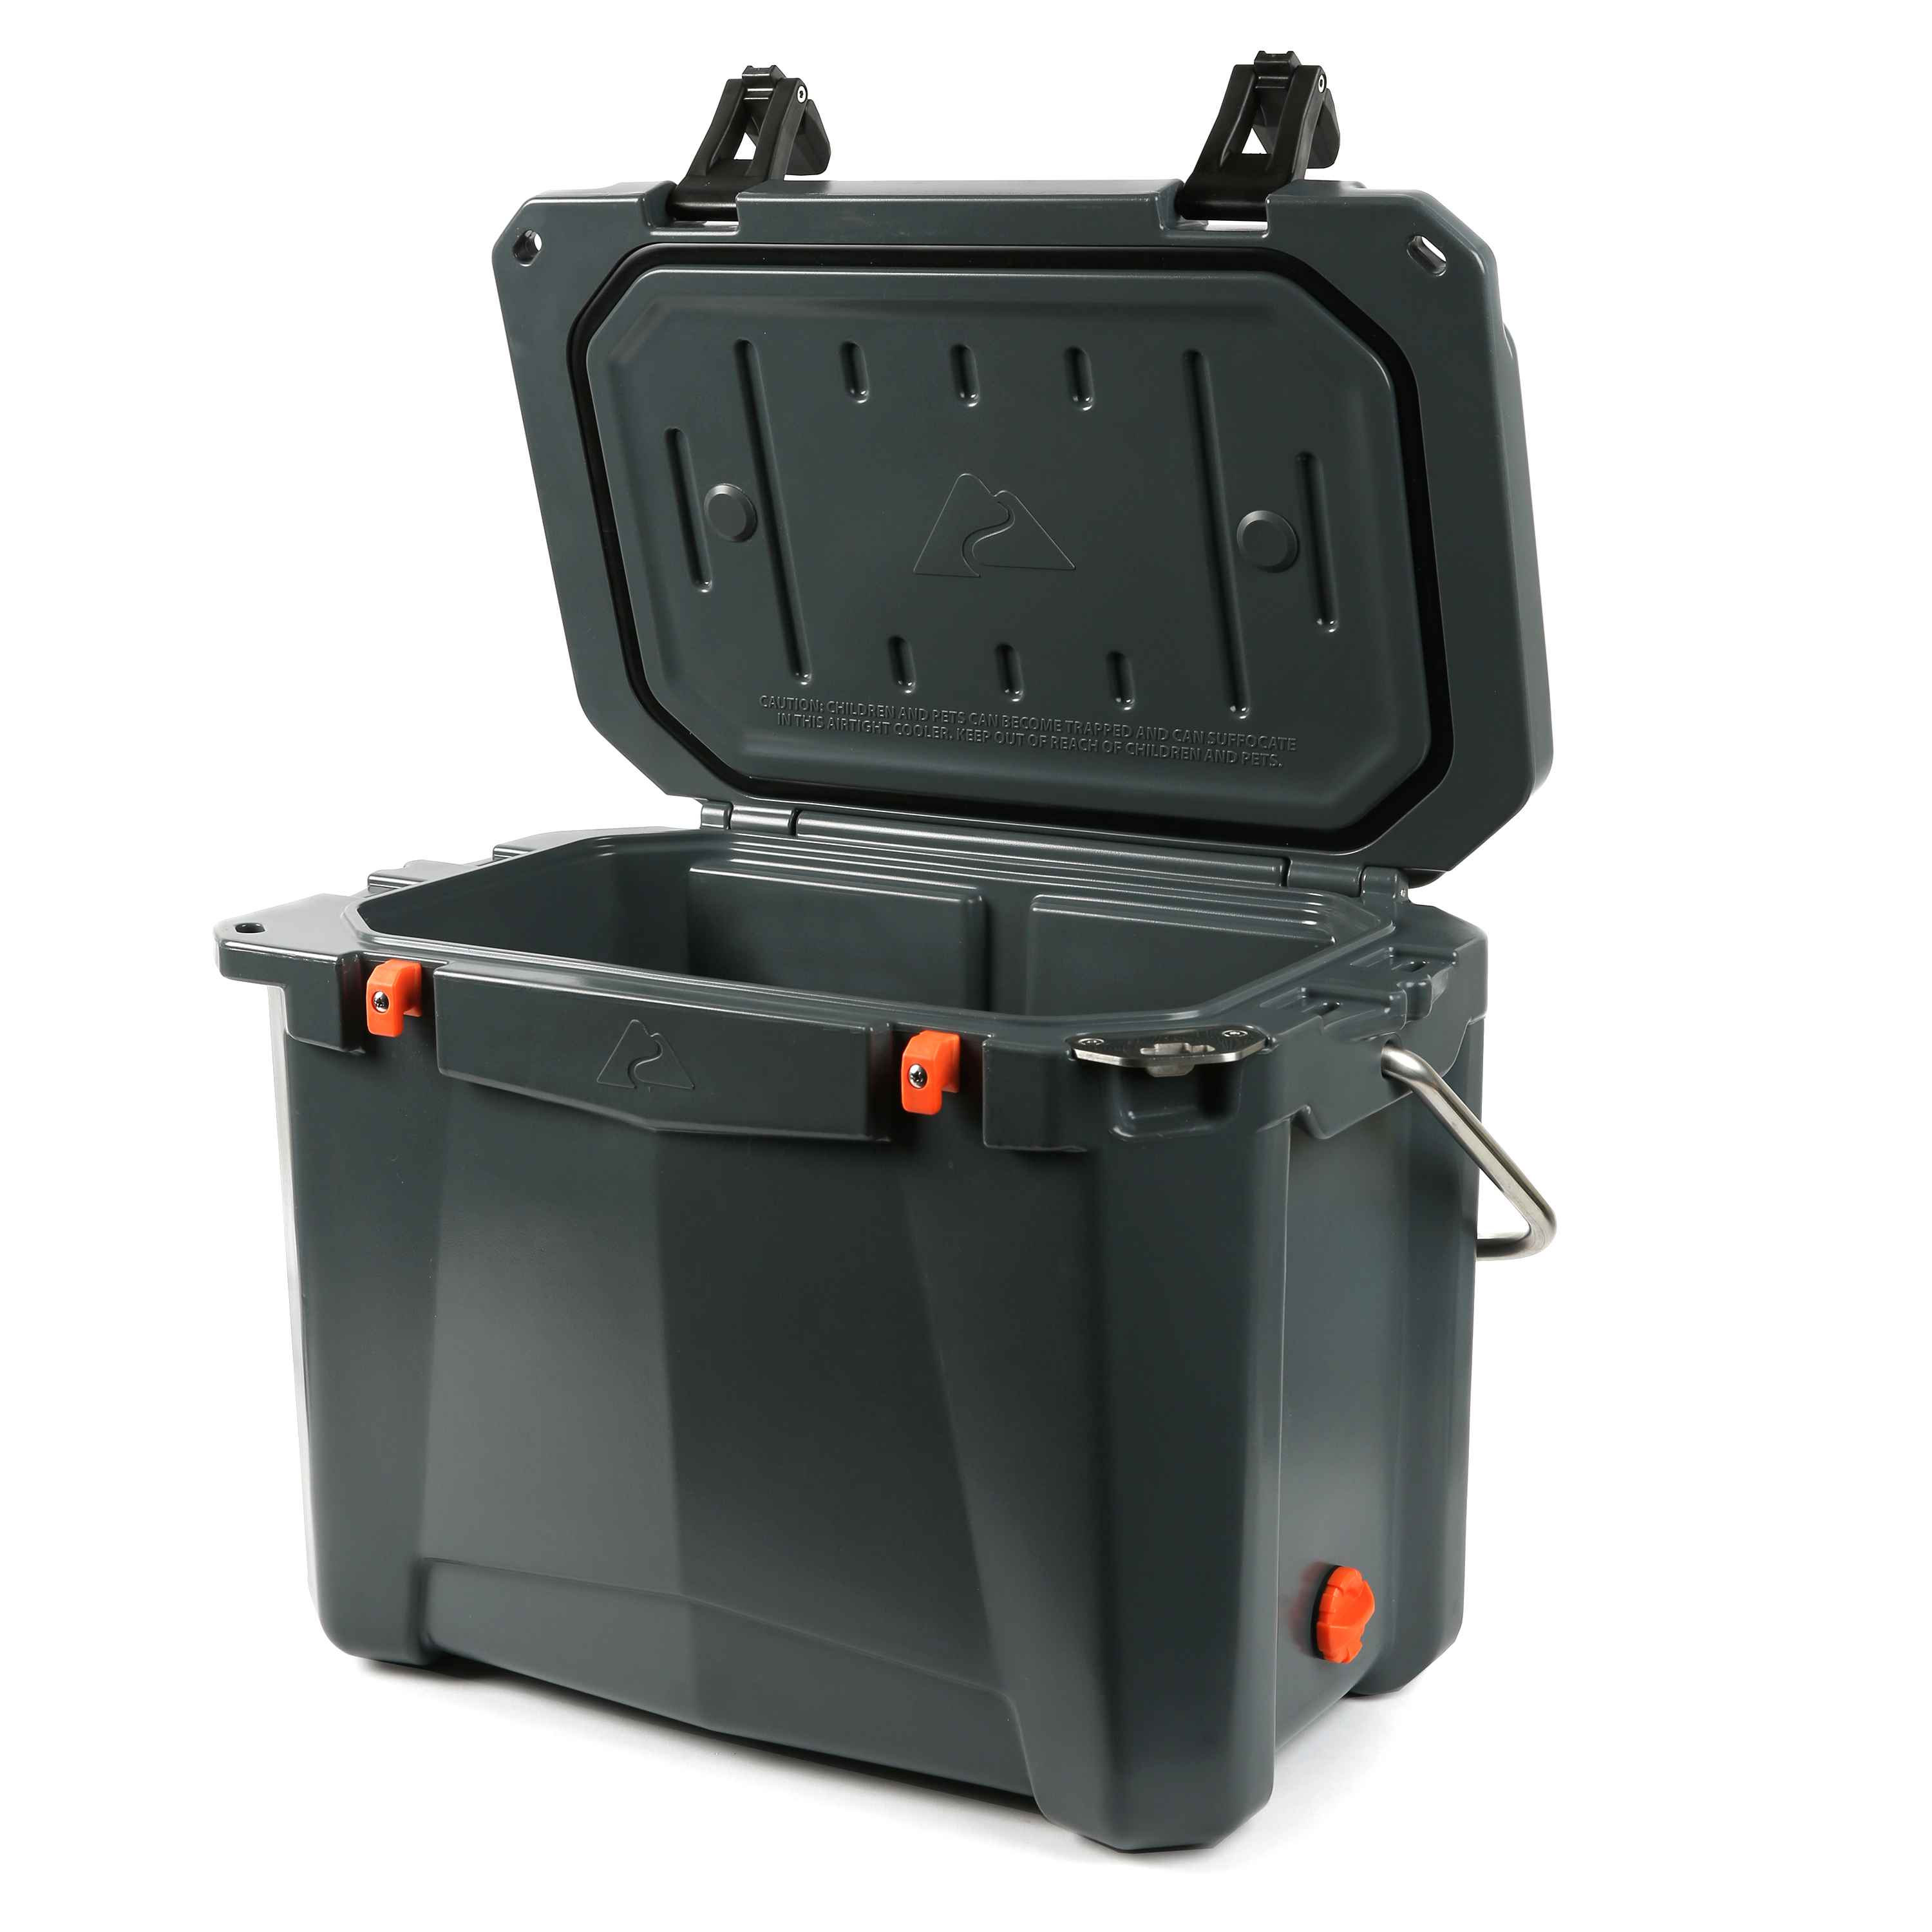 Ozark Trail 26 Quart High Performance Roto-Molded Cooler with Microban®, Grey - image 2 of 15